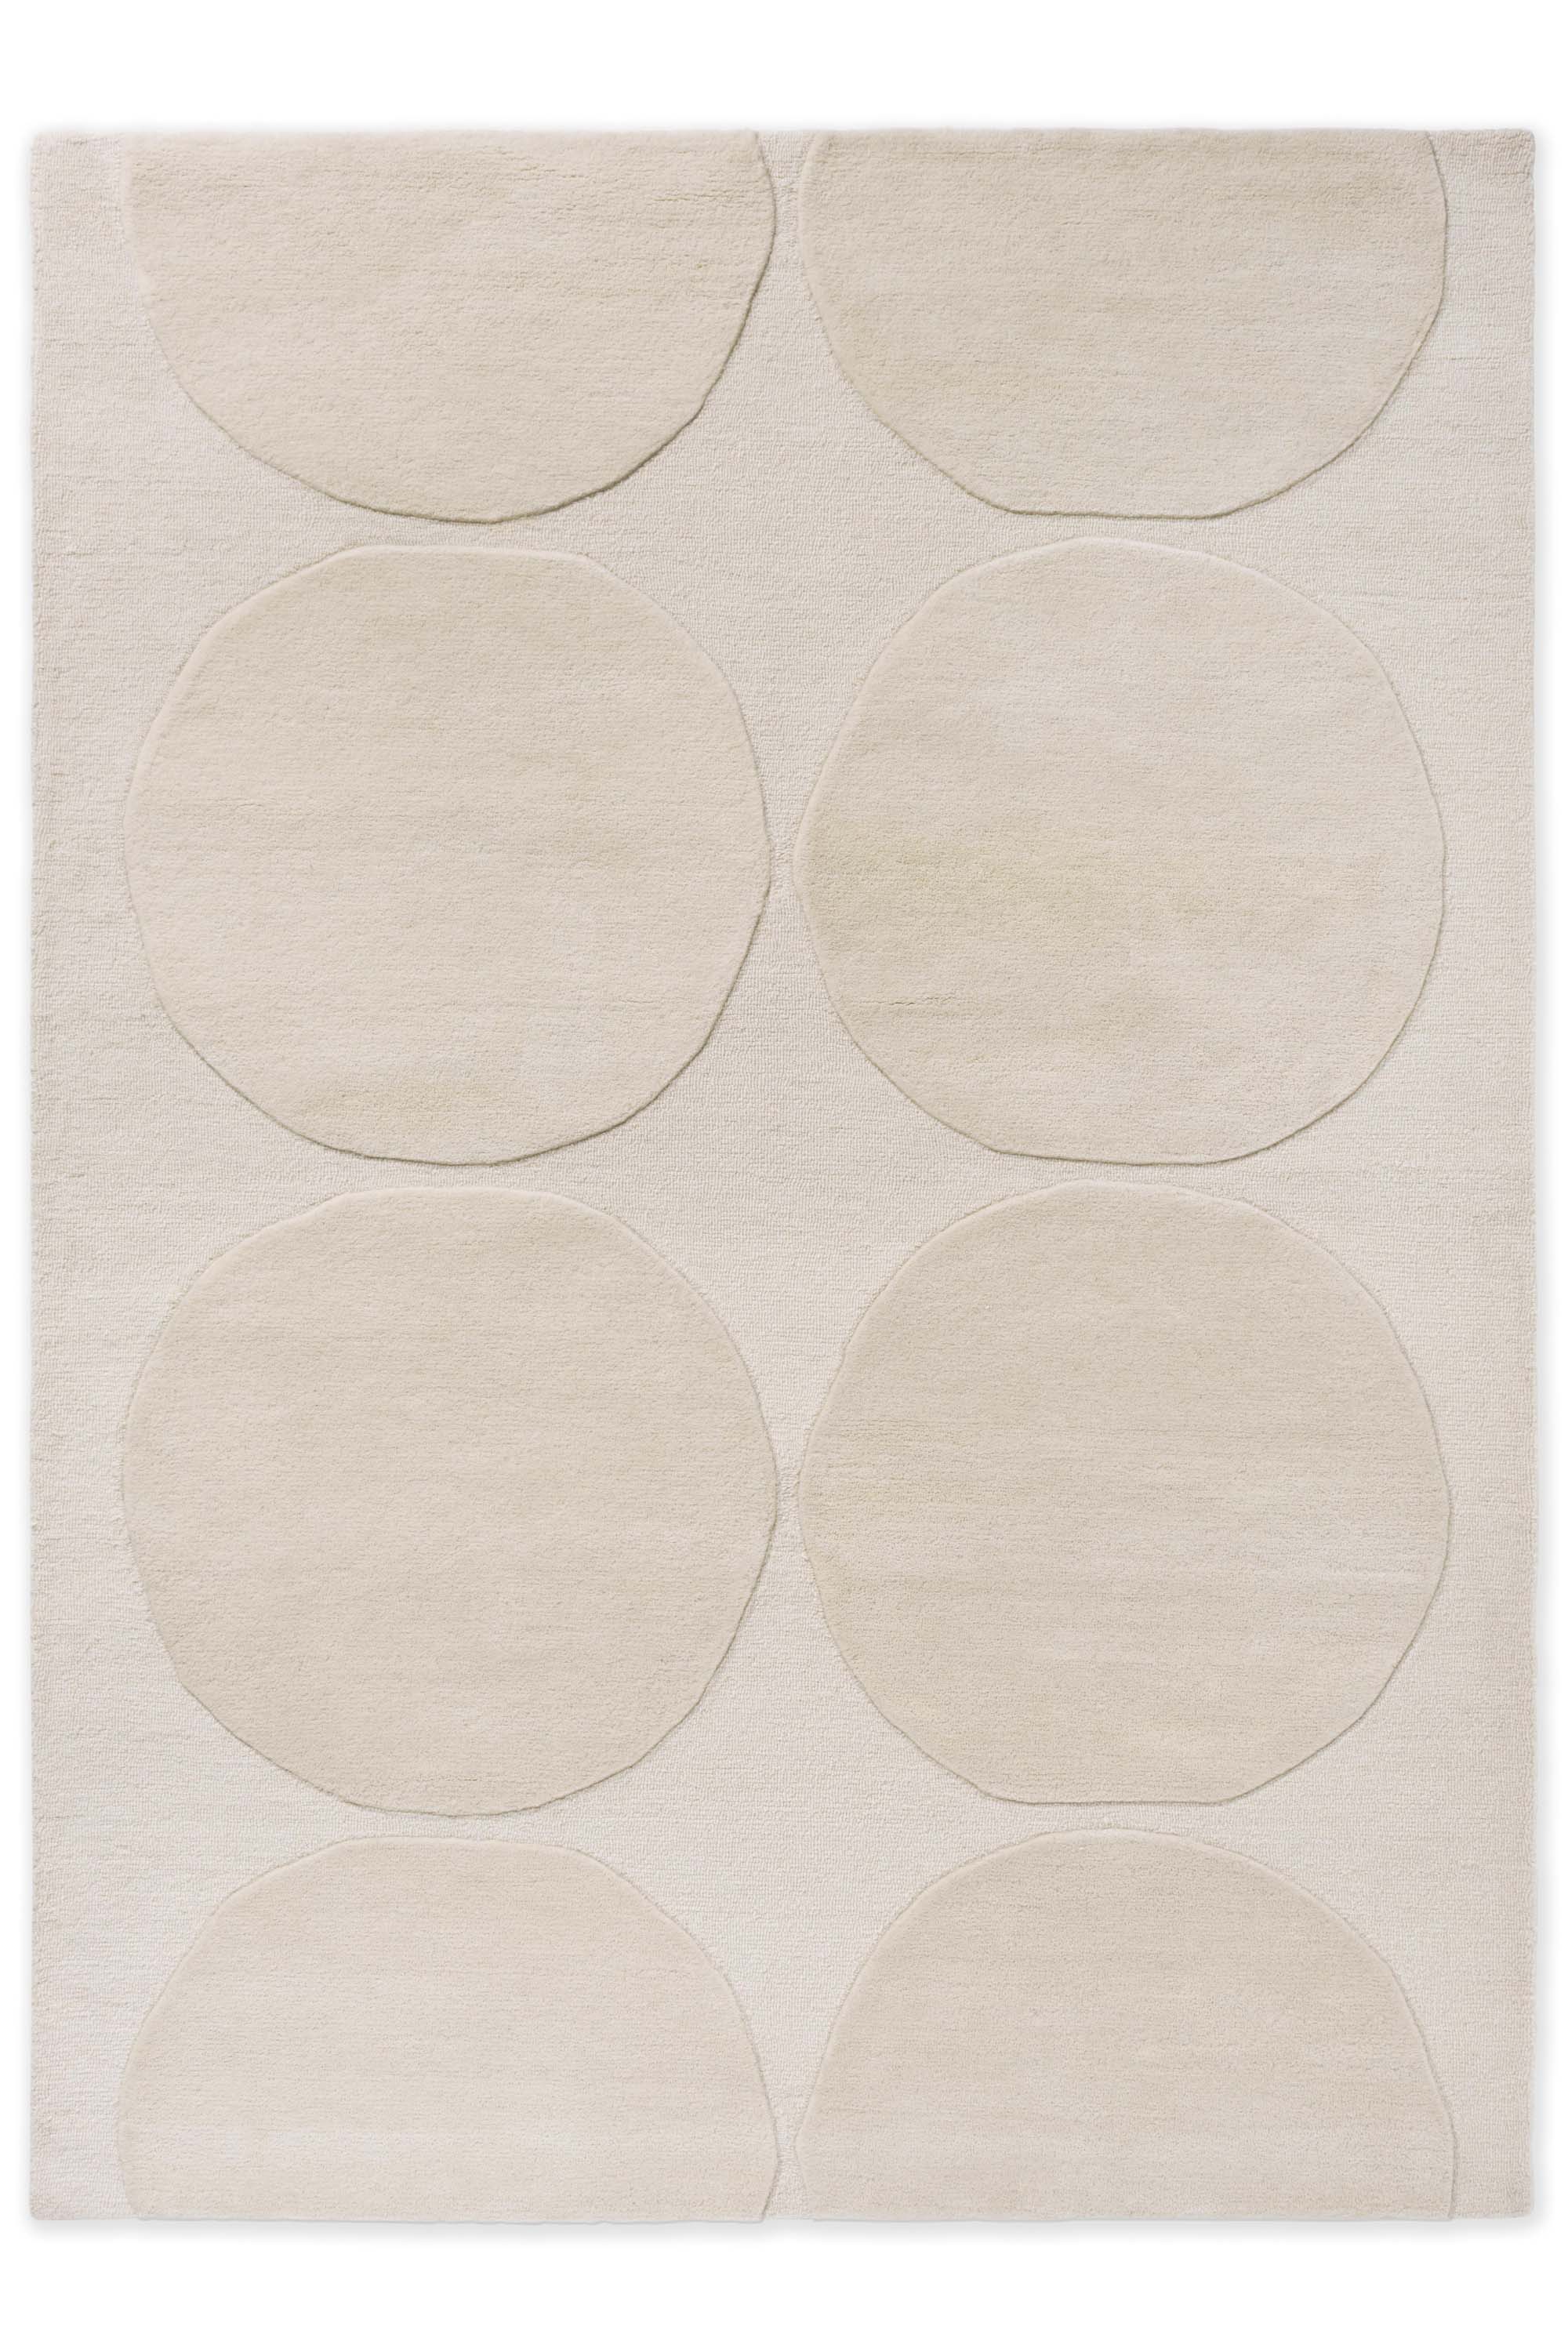 Beige rug with repeated circle pattern